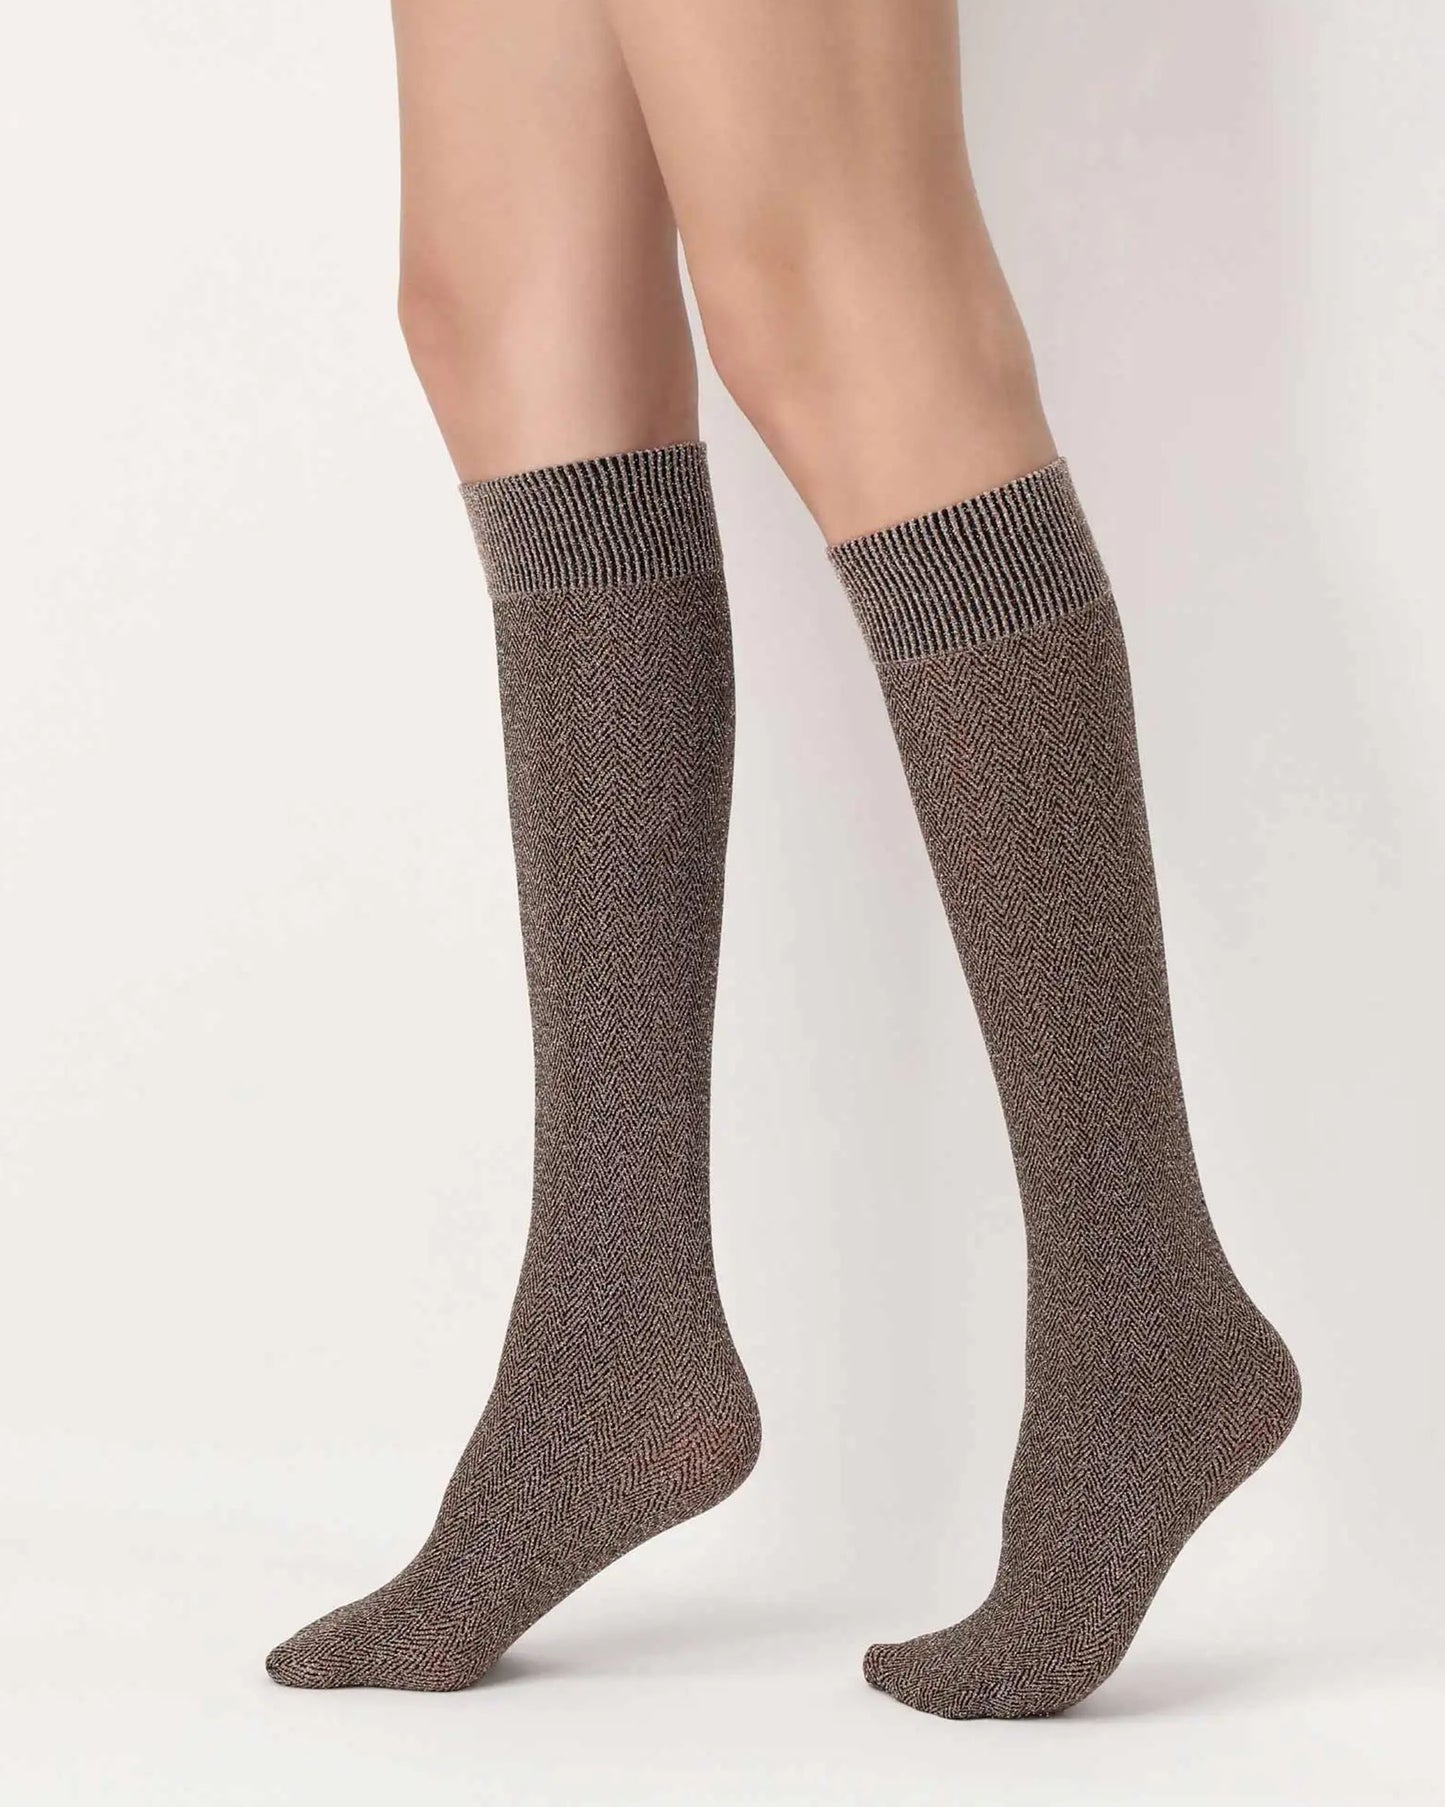 Oroblù Tweed Sparkly Knee-Highs - Opaque two-toned tweed herringbone patterned fashion knee-high socks in beige and black with sparkly silver lamé and light ribbed elasticated comfort cuff.